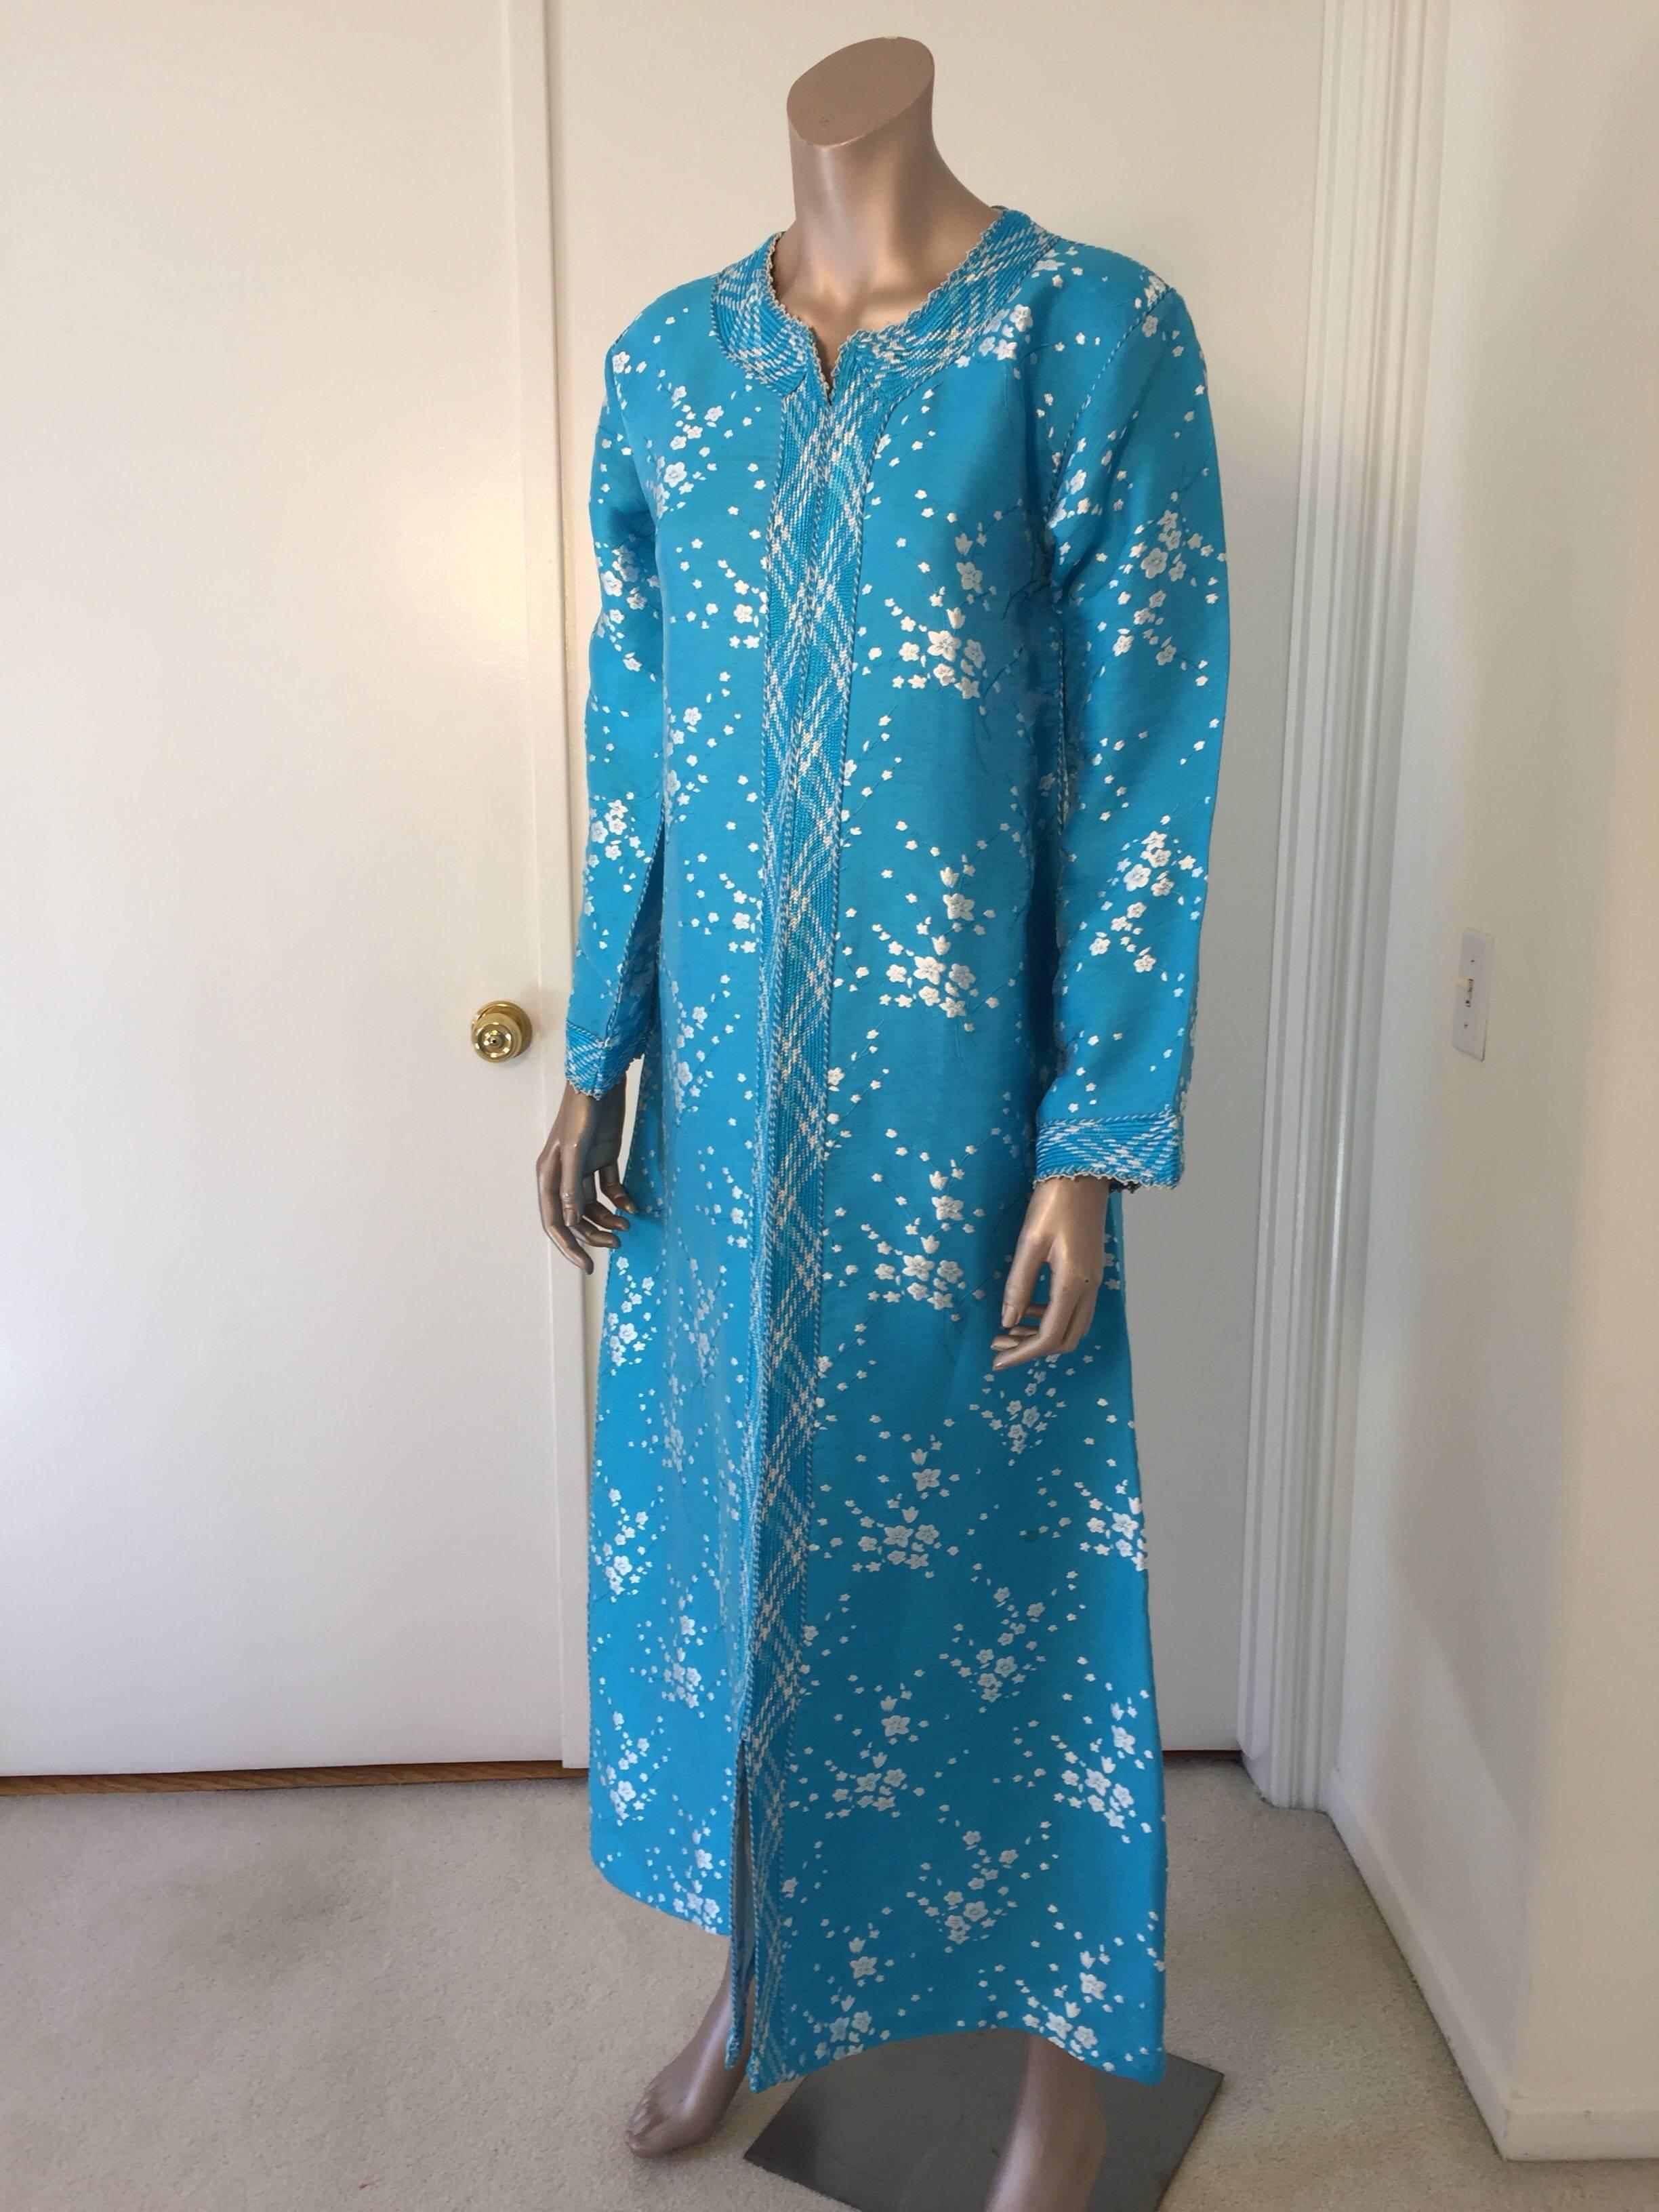 Elegant vintage designer Moroccan turquoise blue kaftan, embroidered with turquoise and white trim.
This chic Bohemian maxi dress kaftan is embroidered and embellished with a blue and white trim. 
One of a kind evening Moroccan Middle Eastern